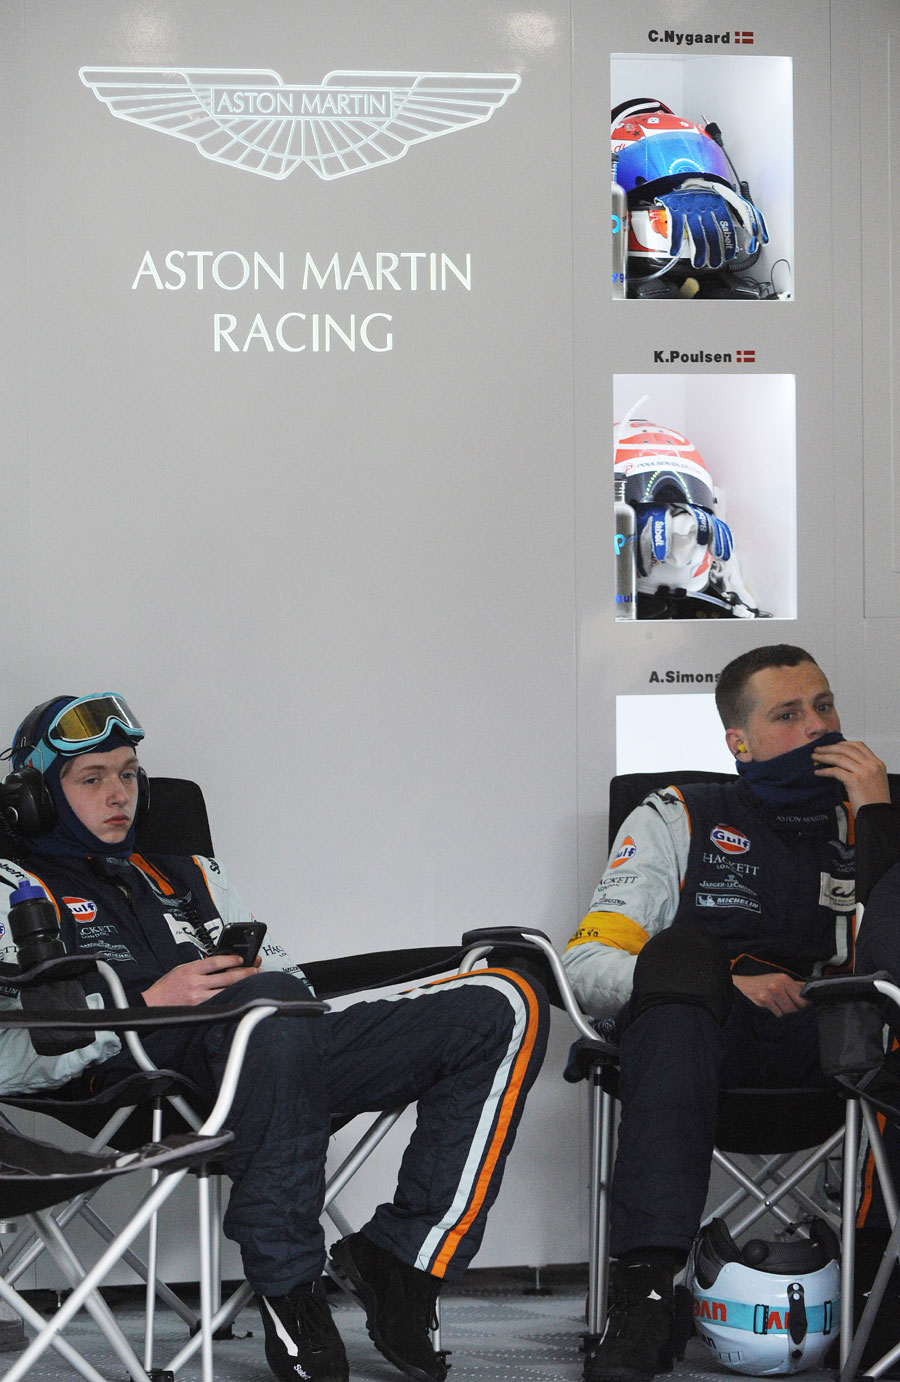 Aston Martin mechanics sit shocked after Allan Simonsen died after crashing into safety barriers